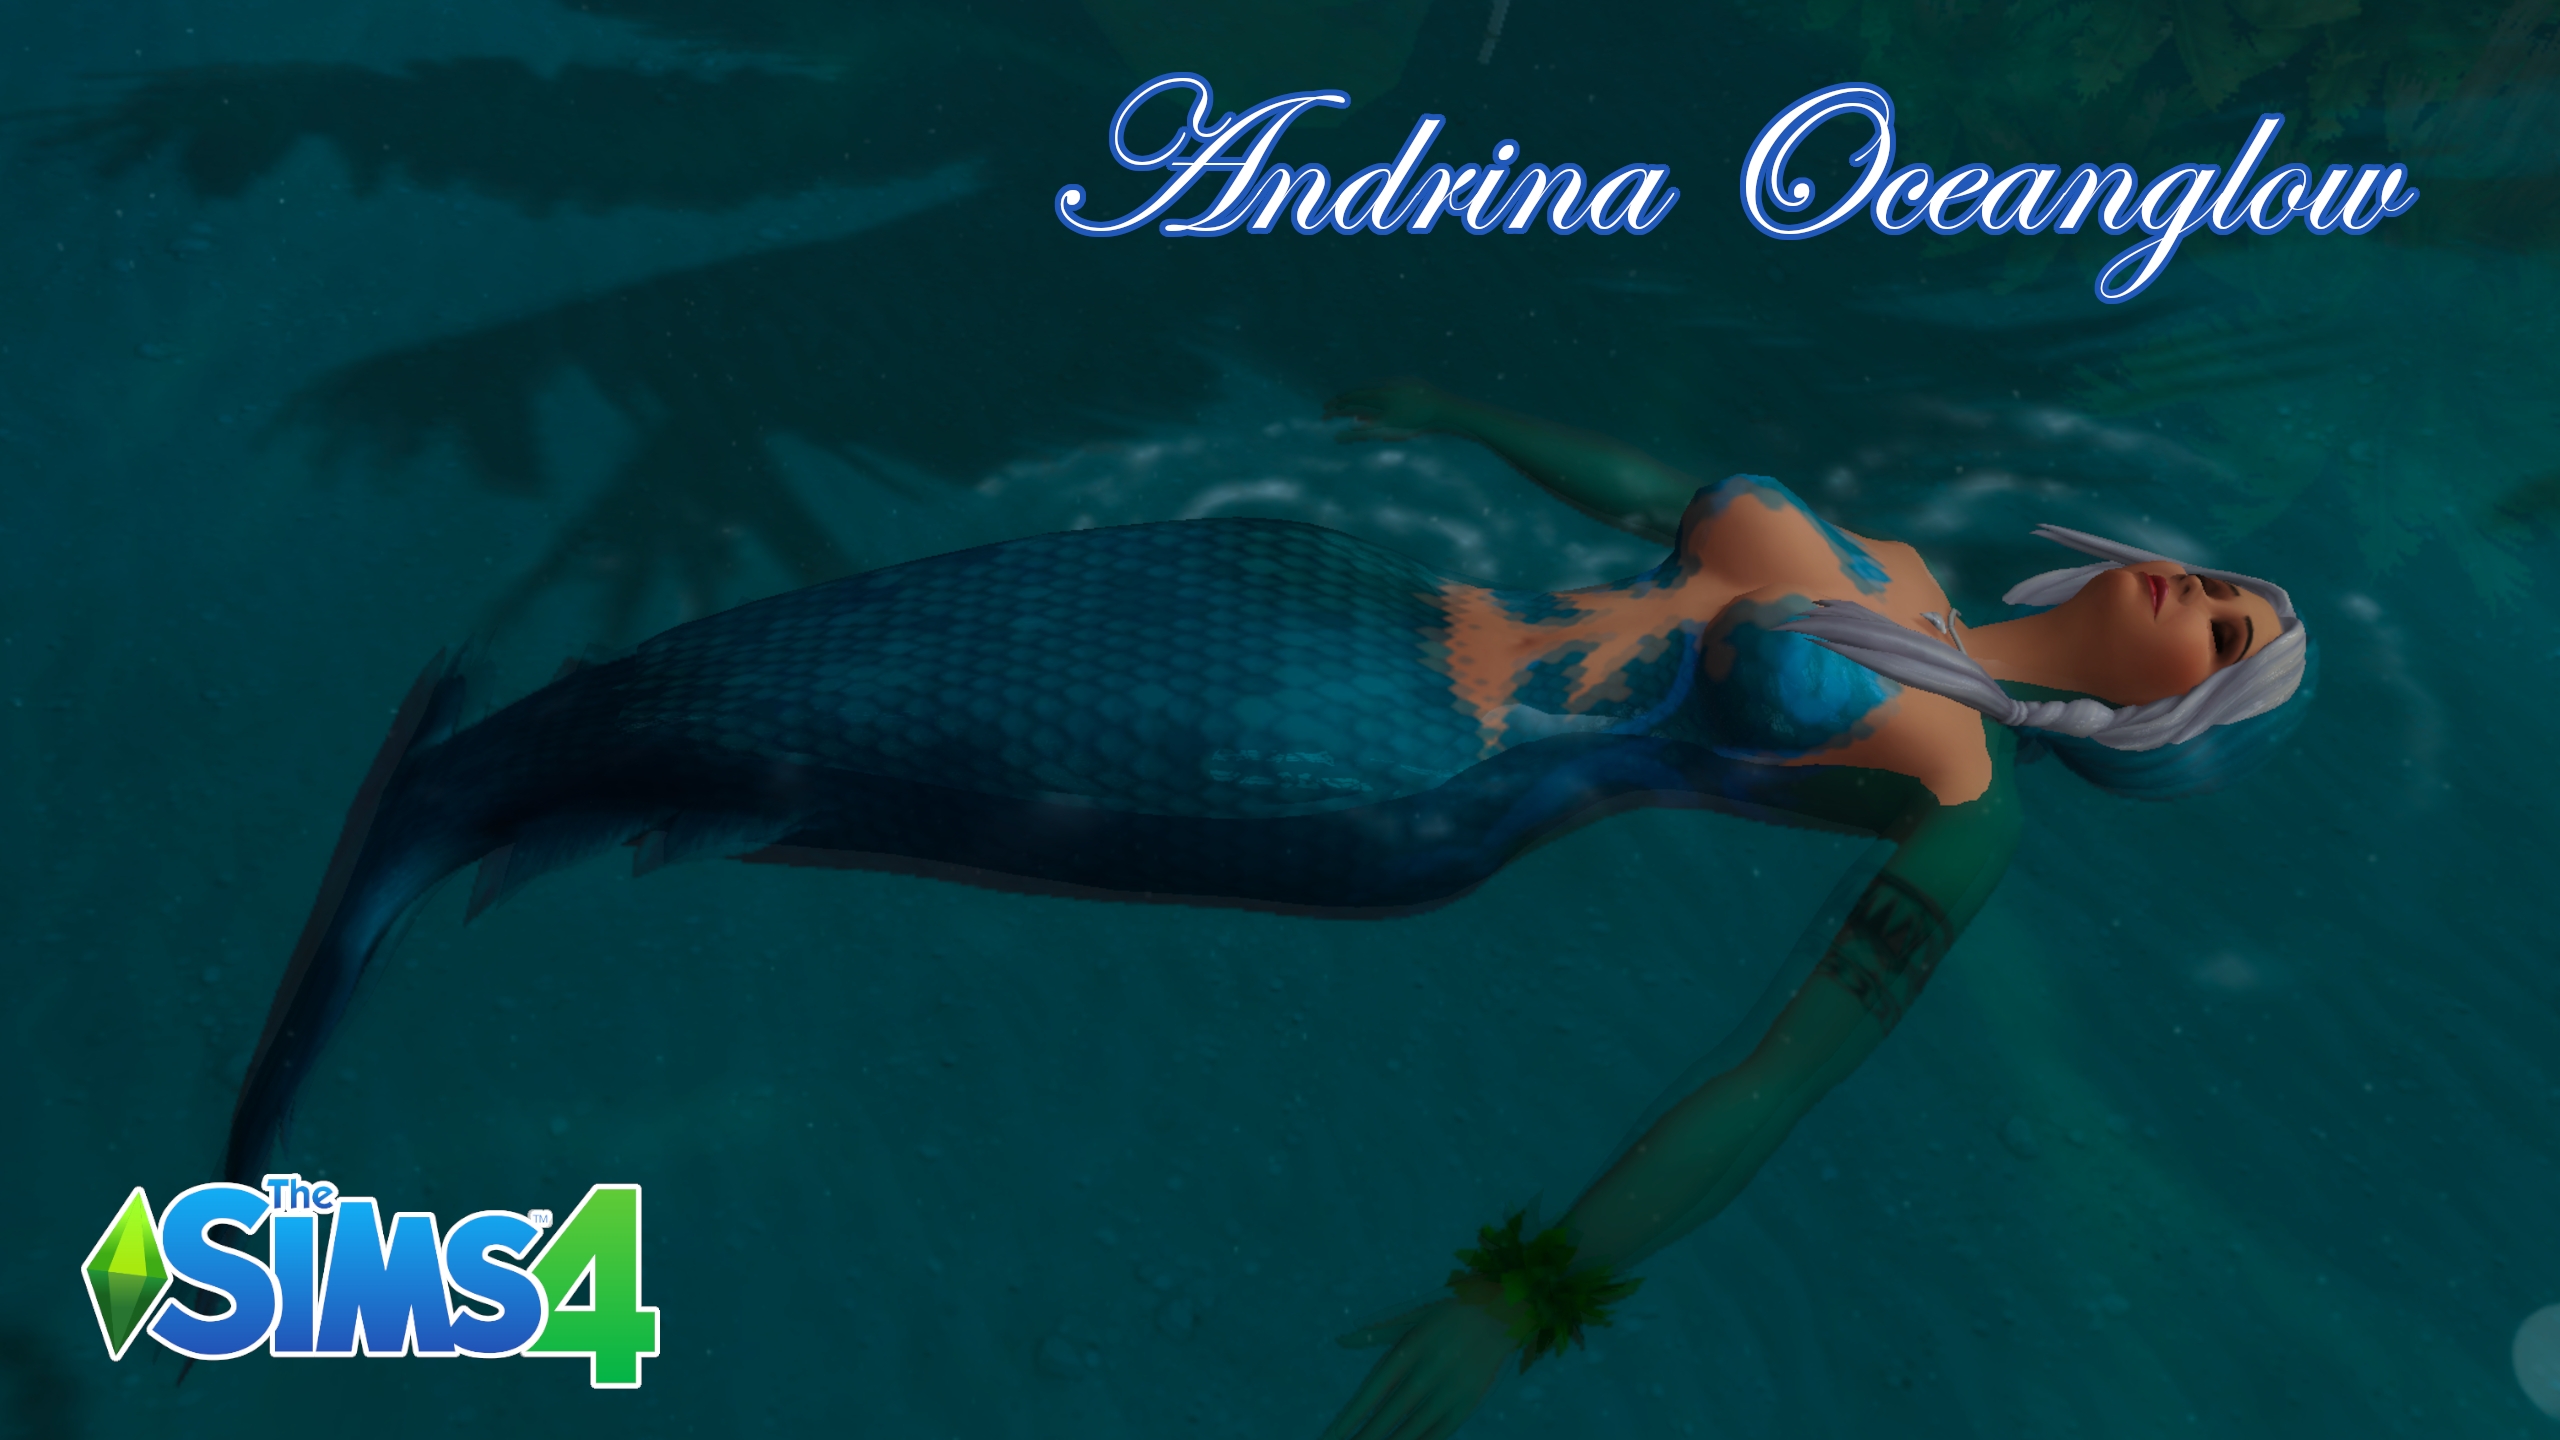 Sims 4 - Mermaid Andrina Oceanglow The Sims 4 Mermaid Siren White Hair Bustyfemale Thong Big Ass Toned Female Topless